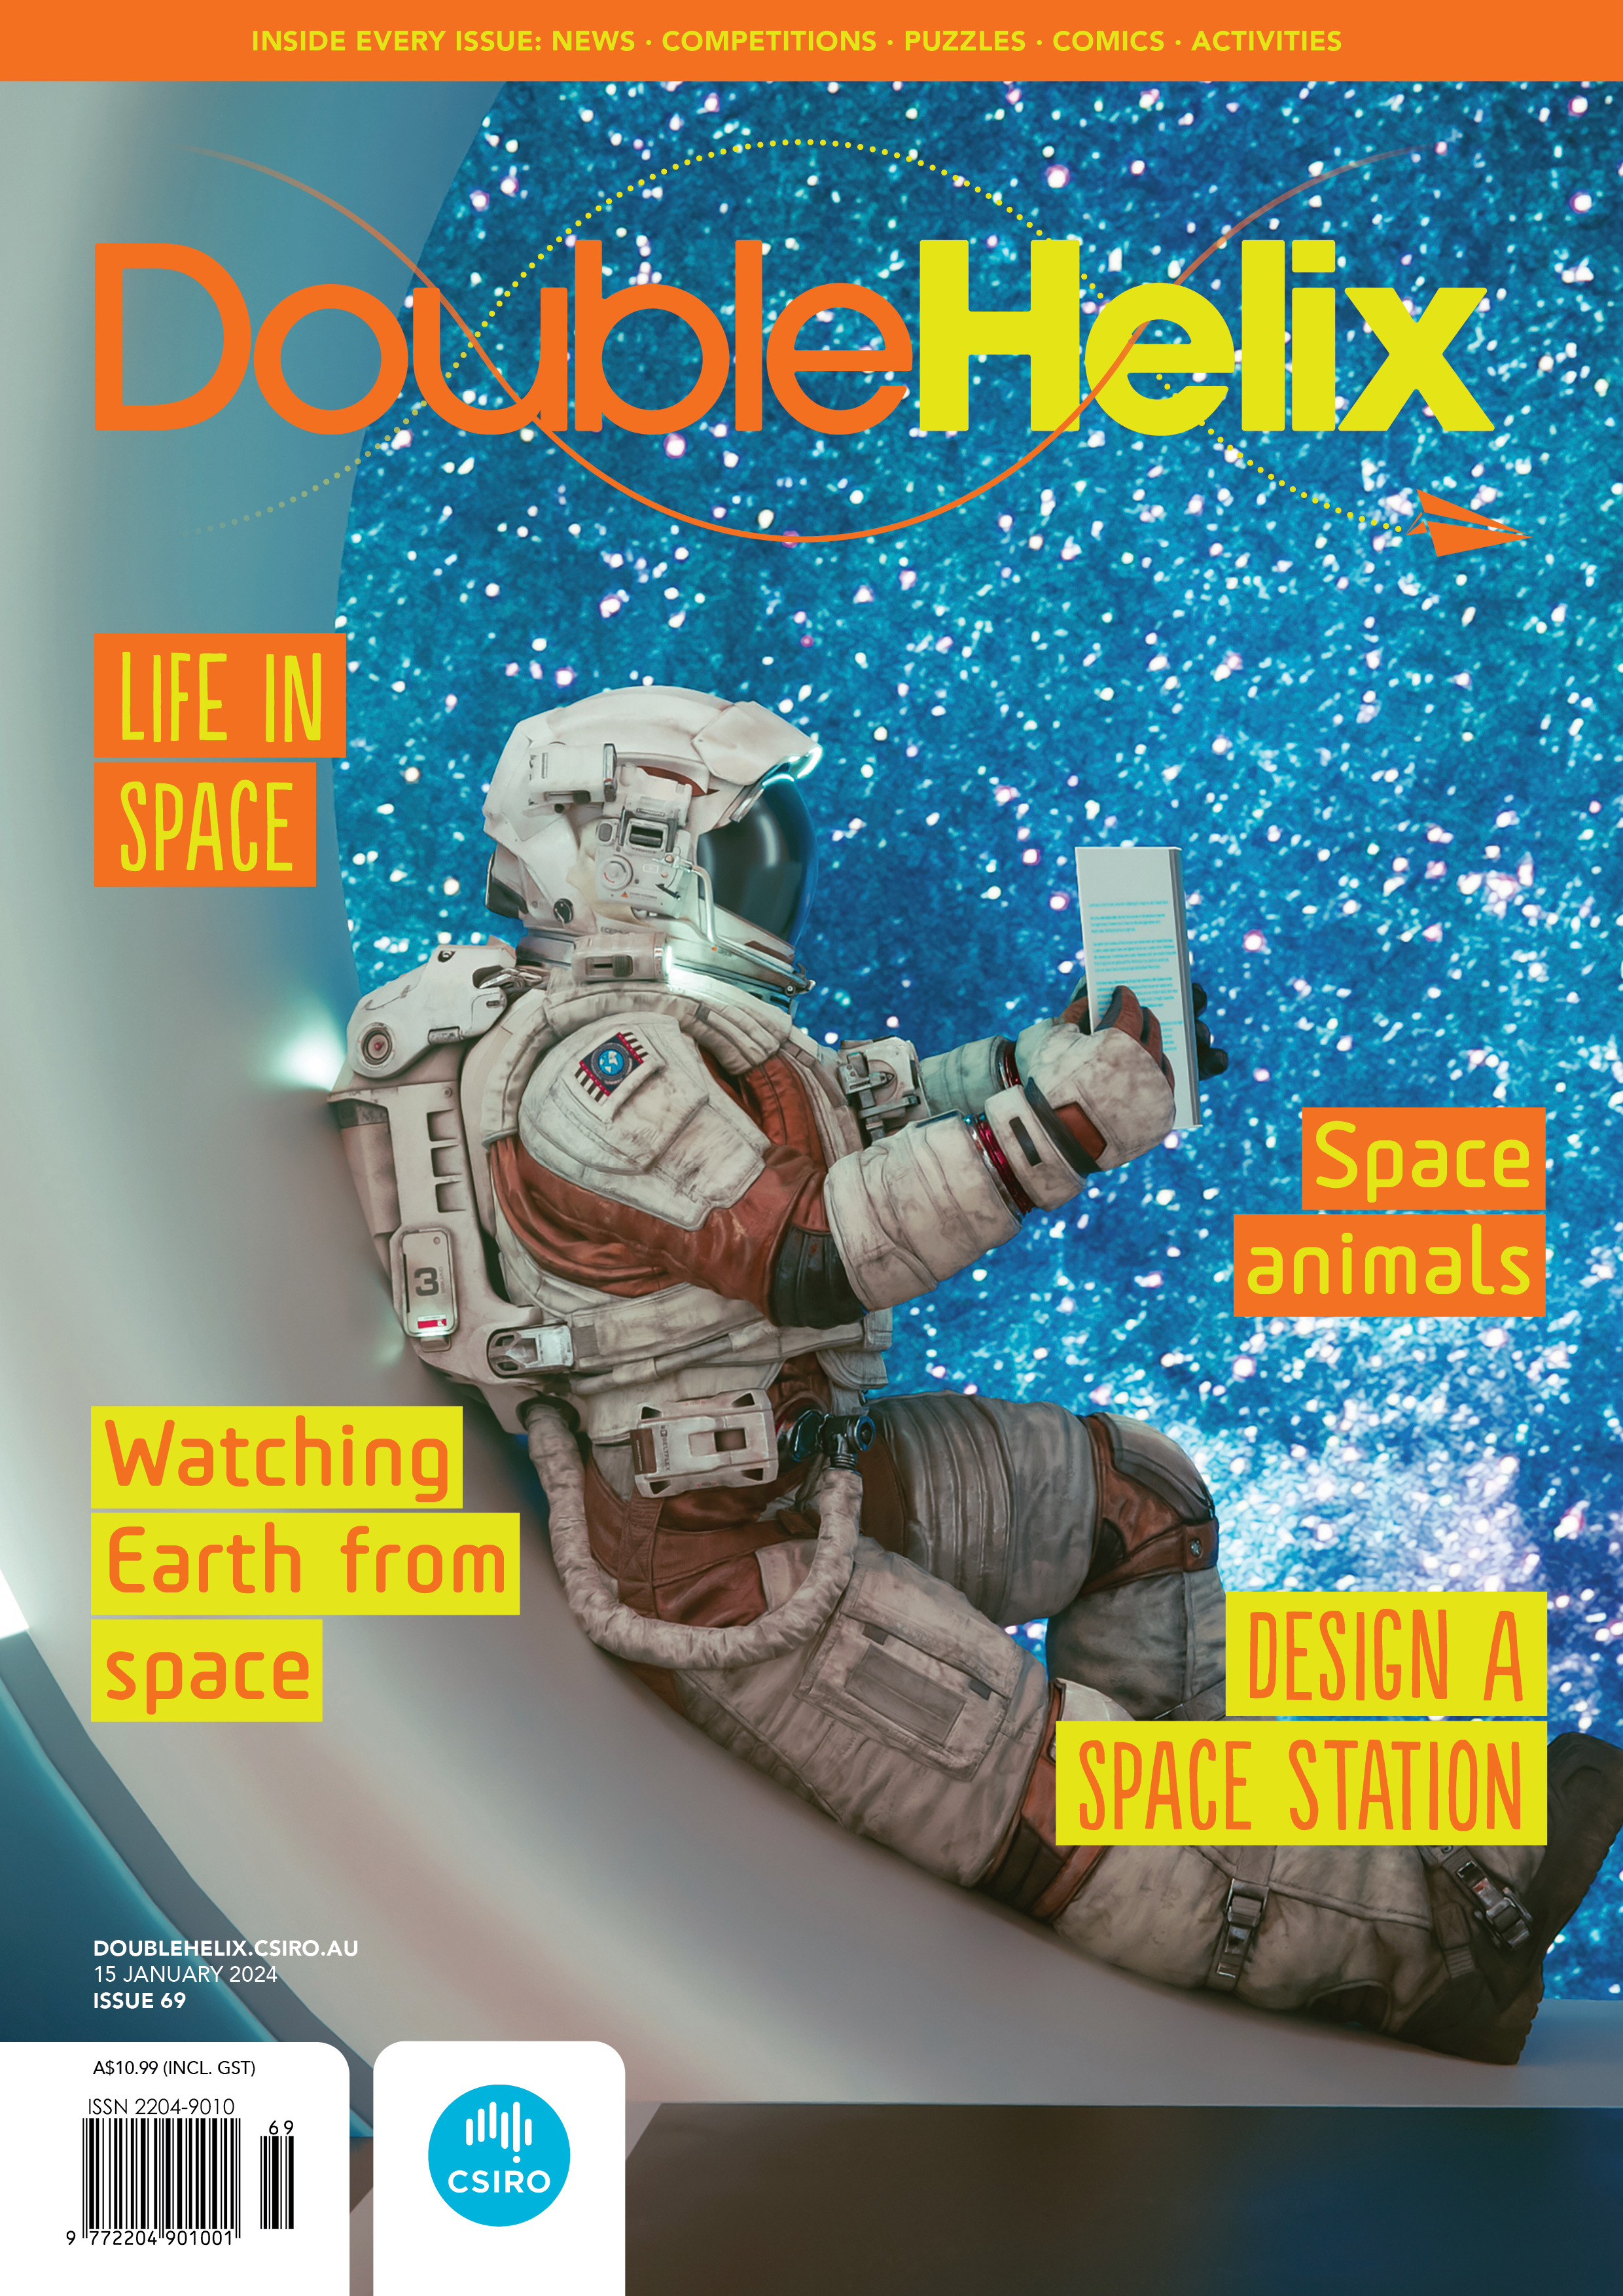 DH69 cover featuring an astronaut reading a book in circular window with stary background.